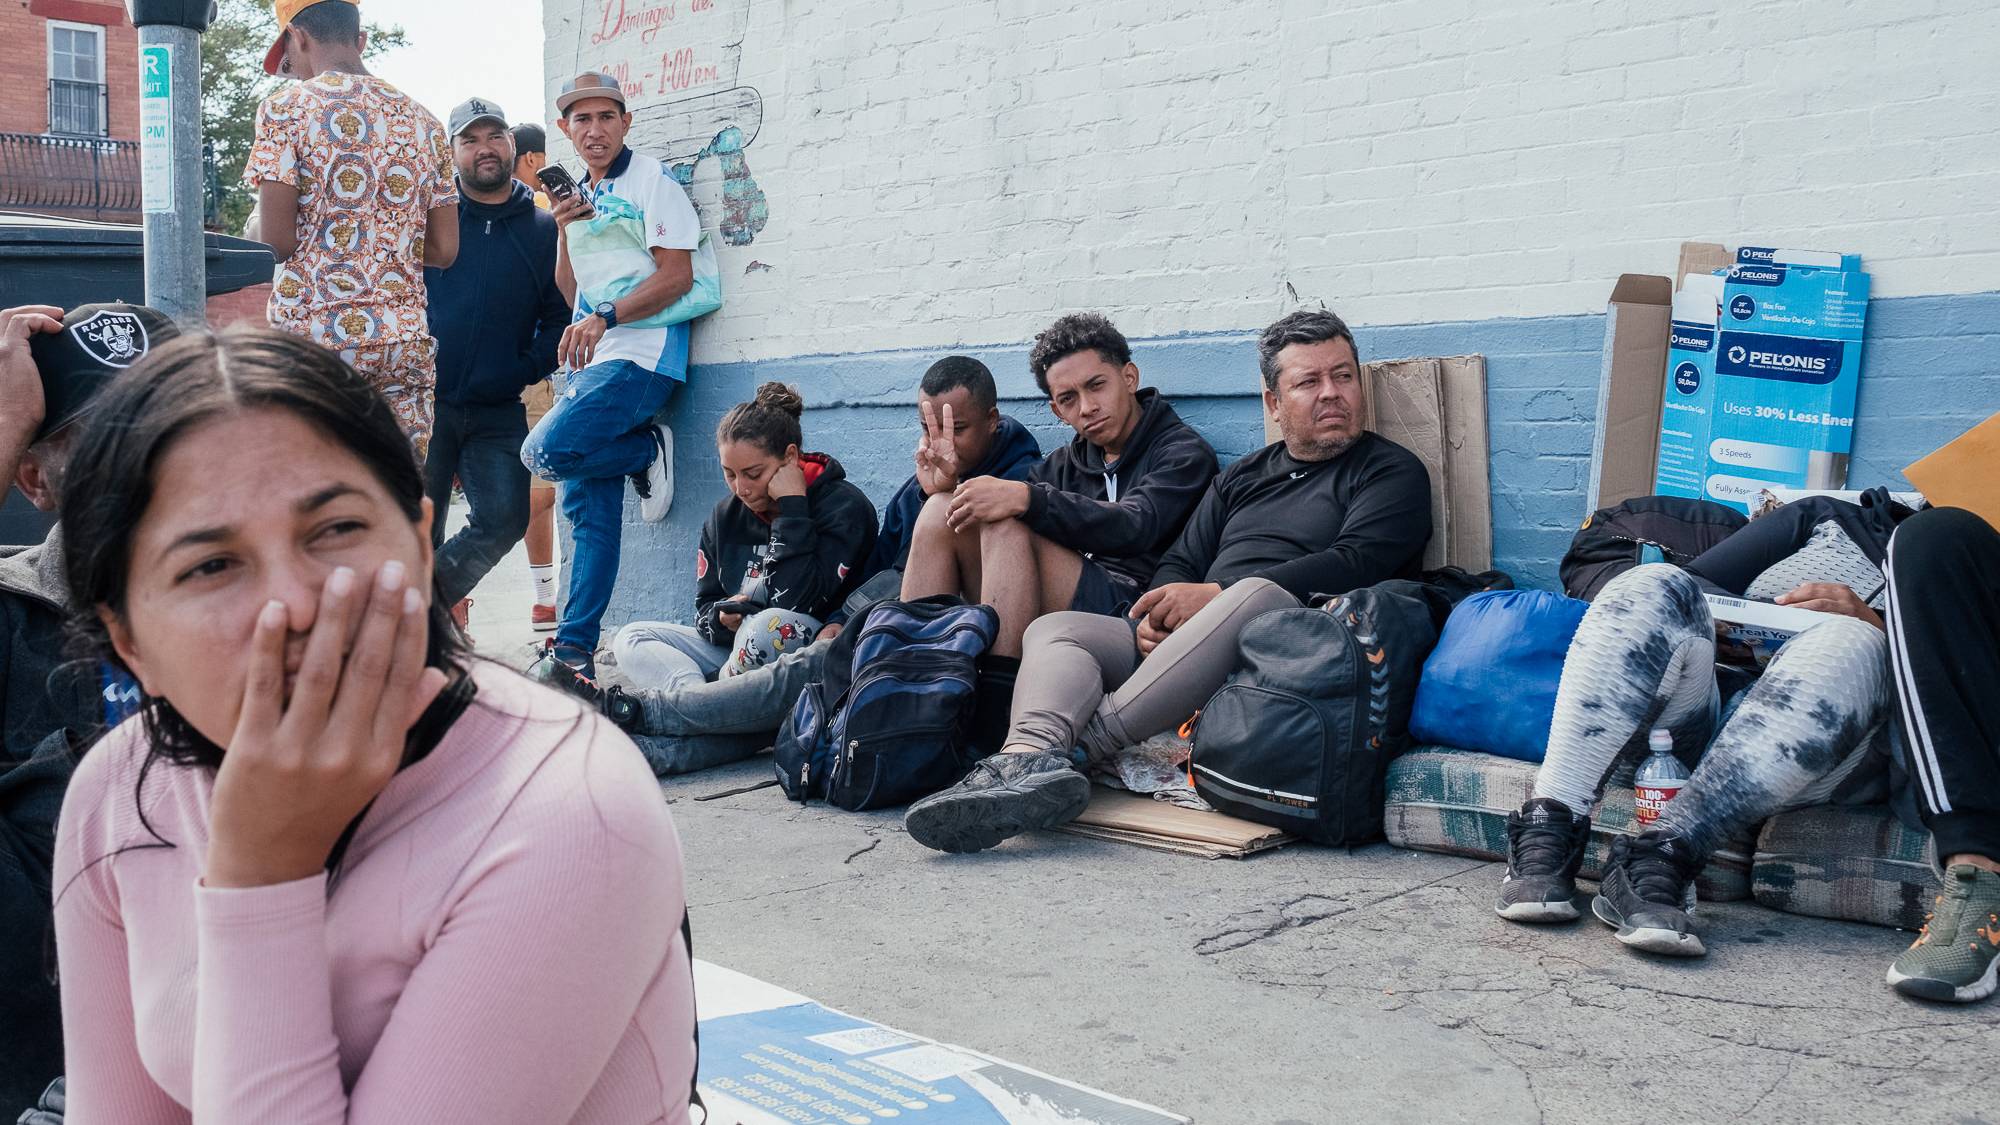 Many migrants who made the trip are now waiting for processing the U.S. city of El Paso. /Francisco Vasquez/@cisconyc